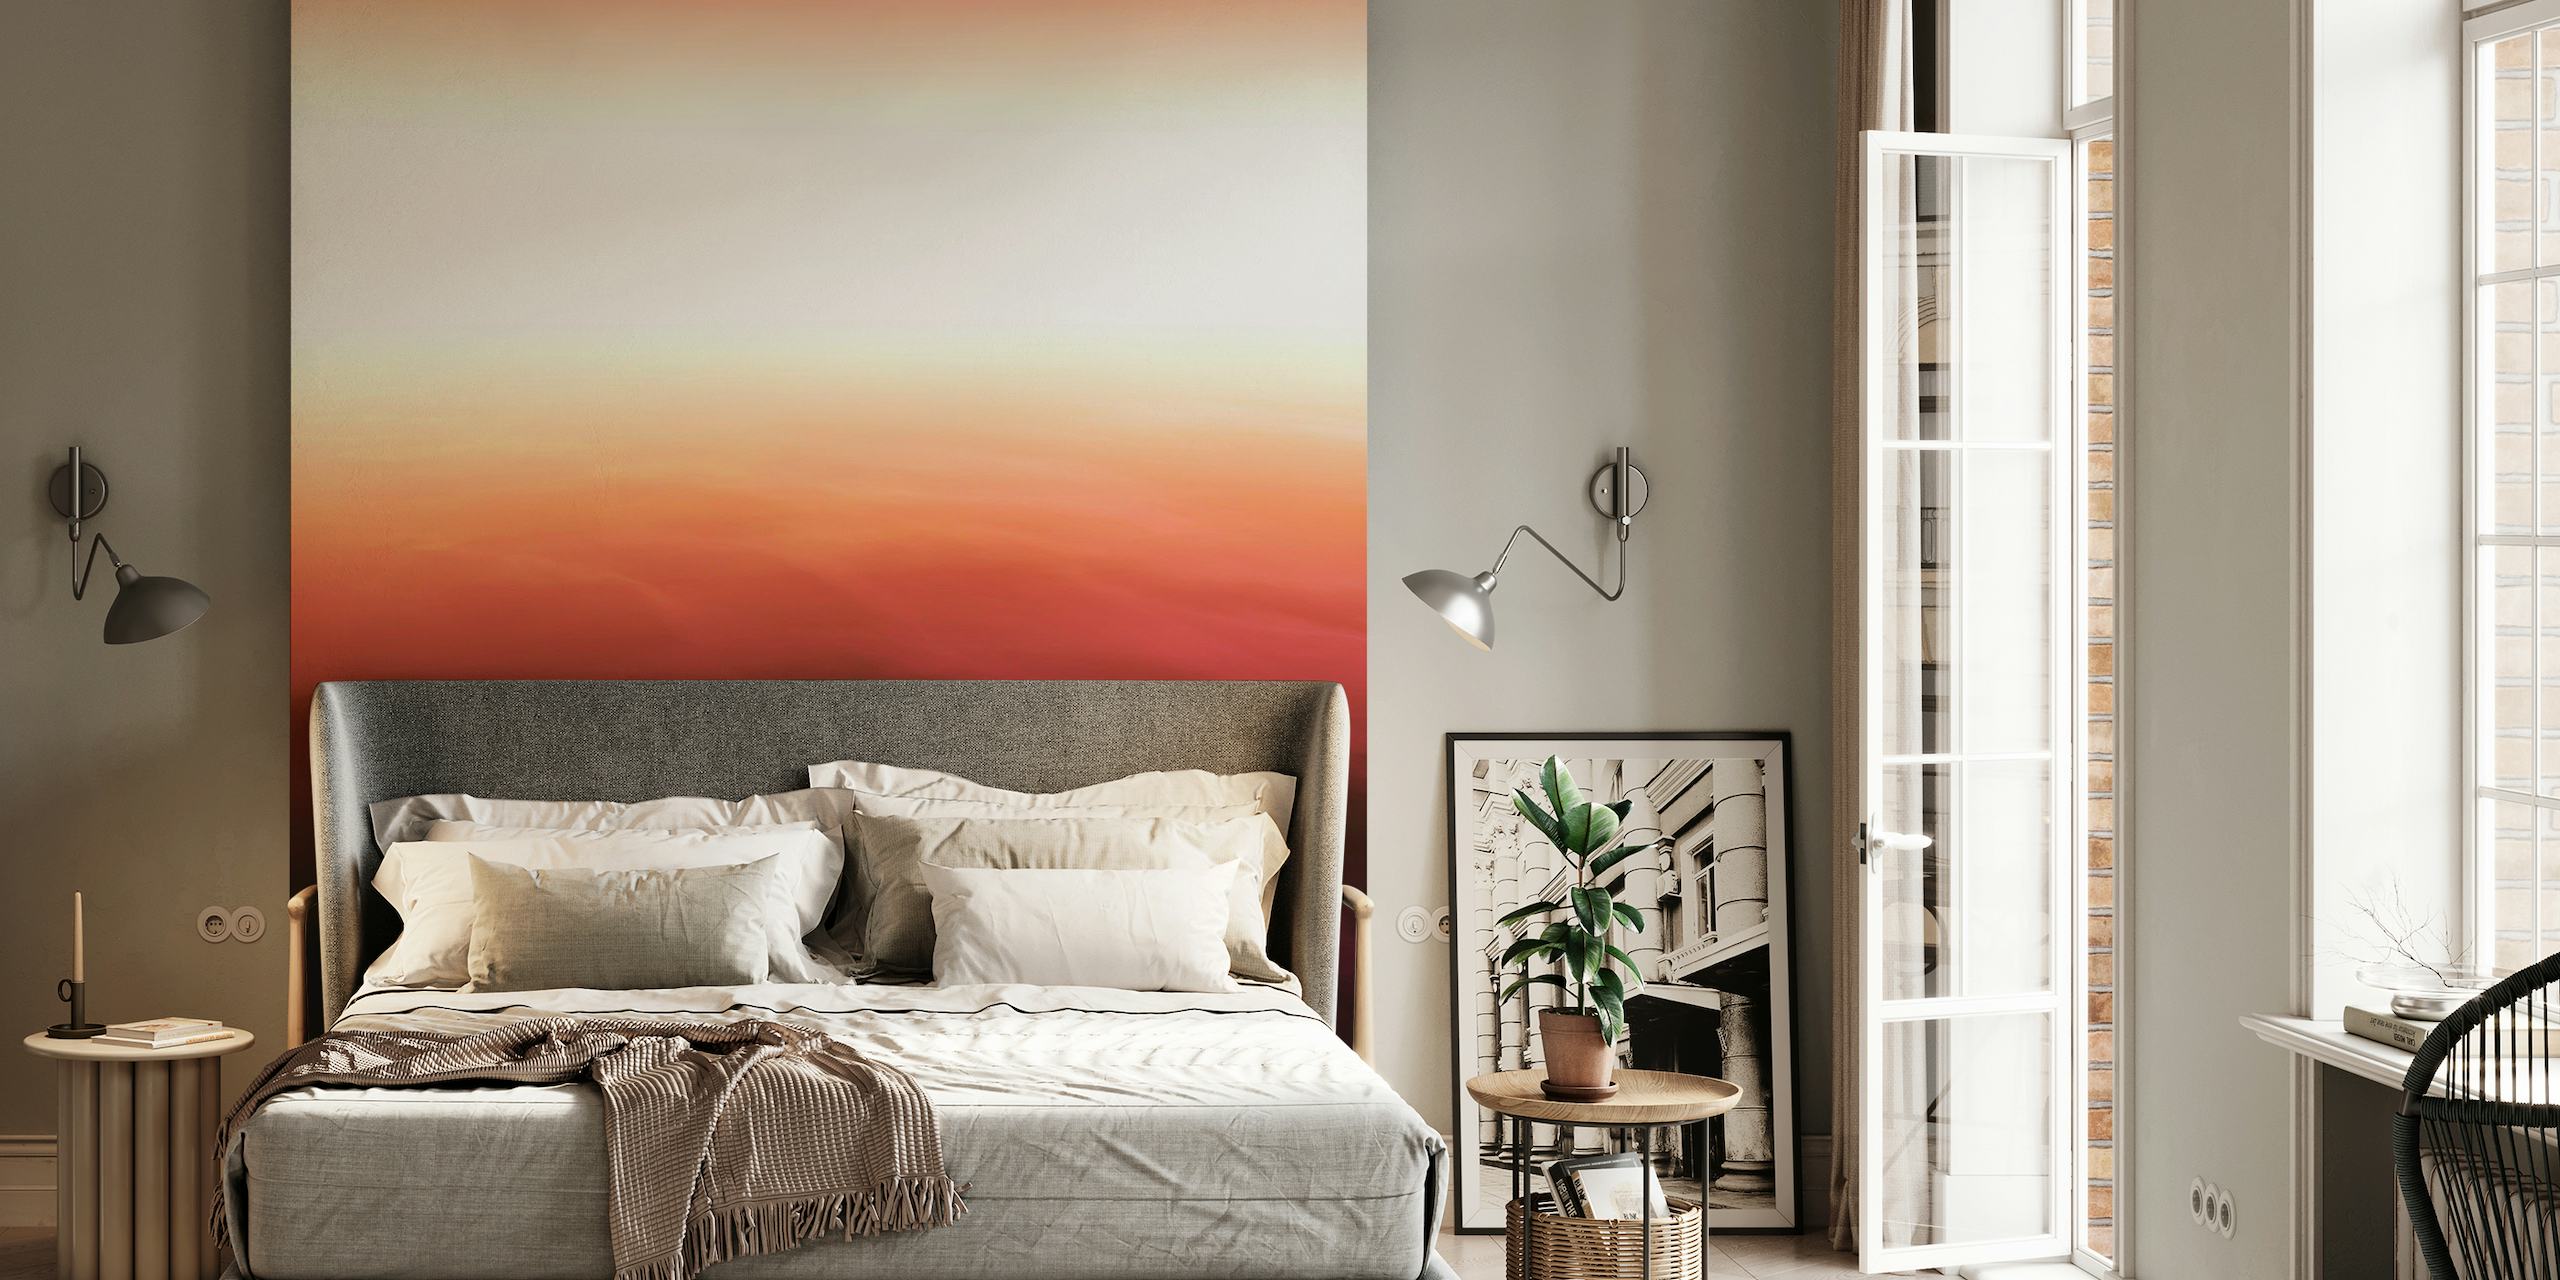 Reddish Skyscape wall mural with gradient of red and shadow hues